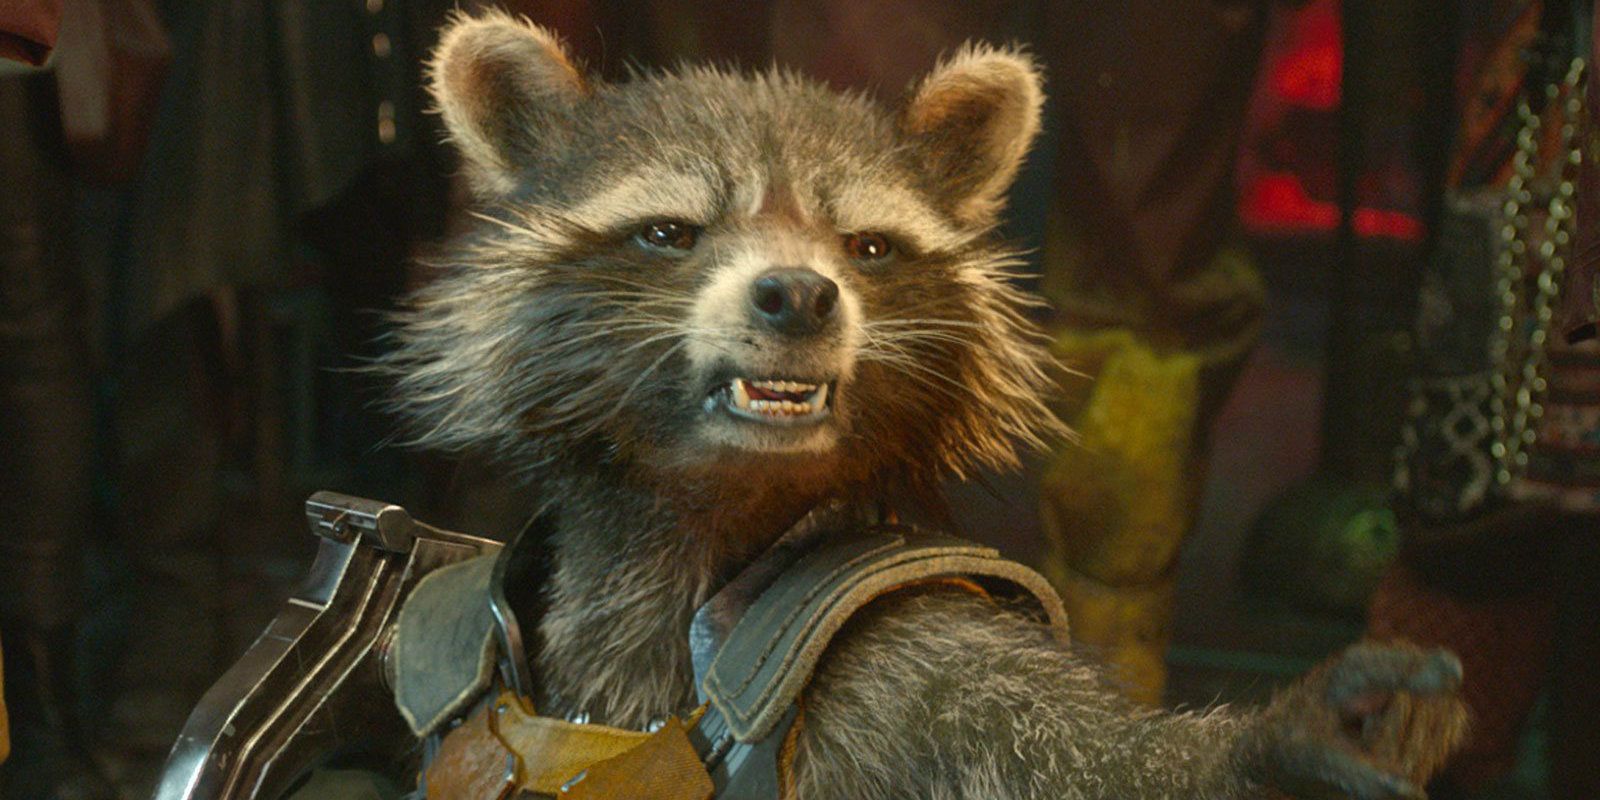 Rocket Raccoon growling in anger in Guardians of the Galaxy